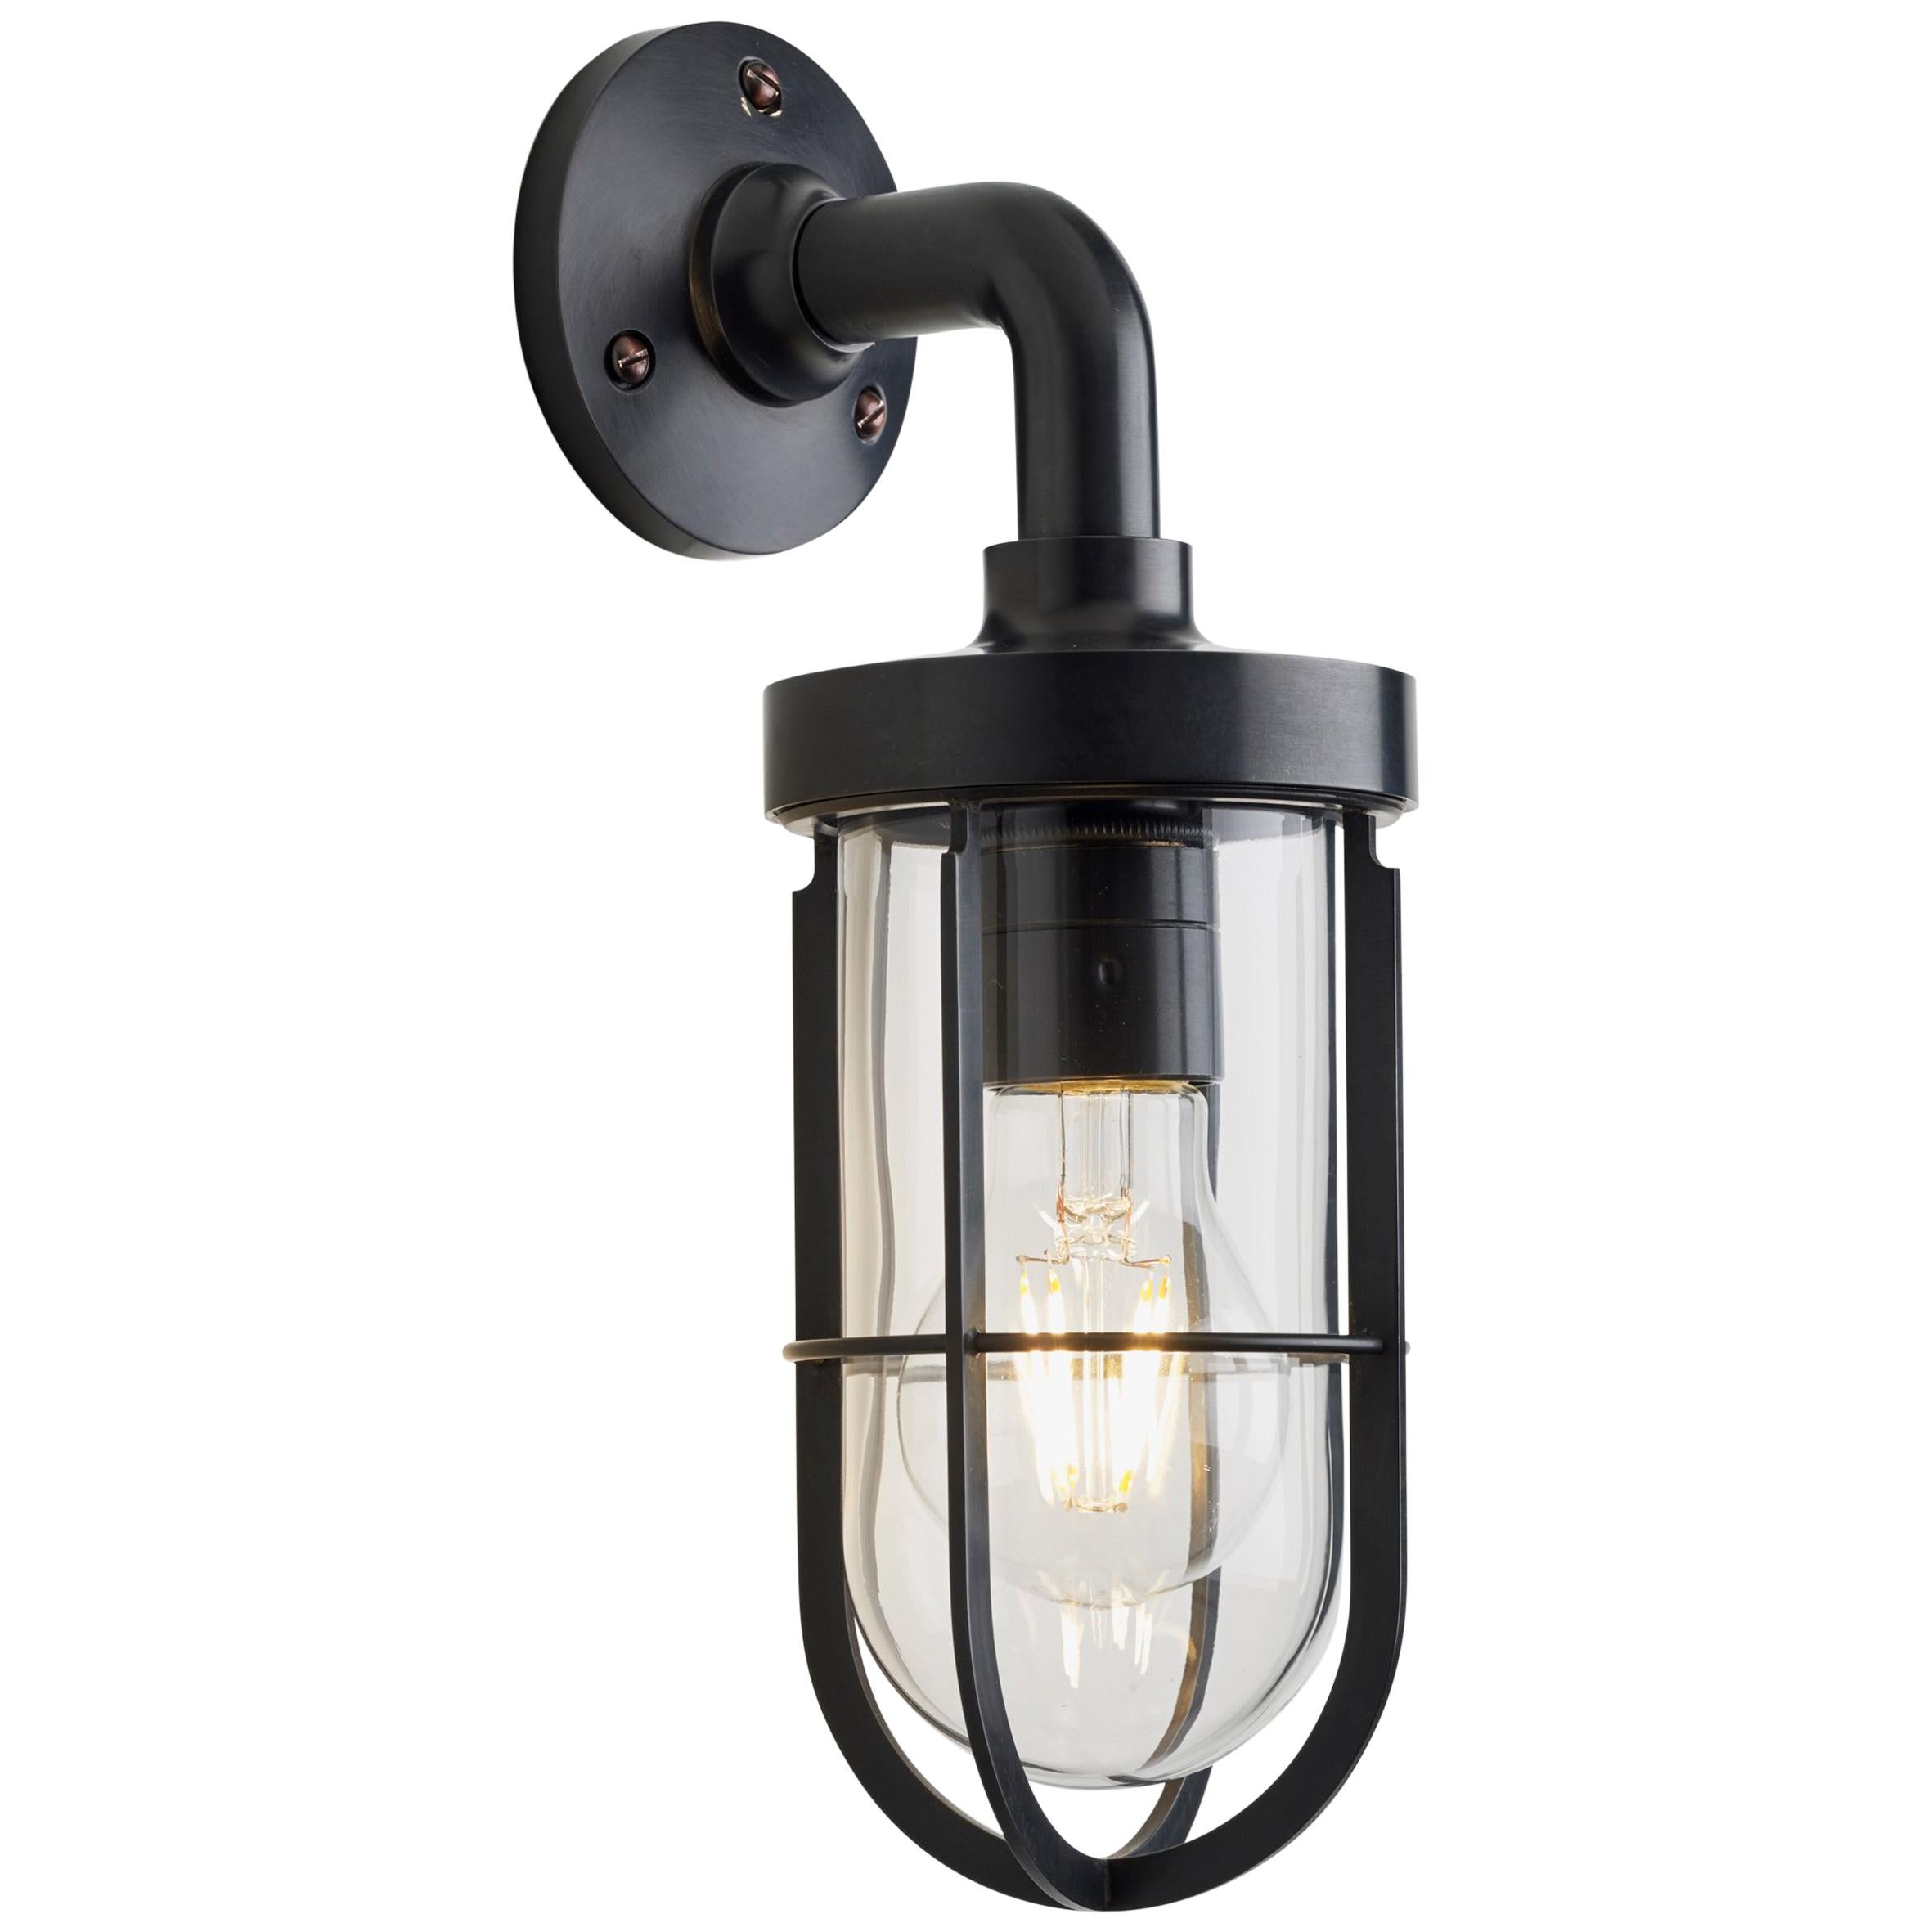 Tekna Docklight Wall Light with Dark Bronze Finish and Clear Glass